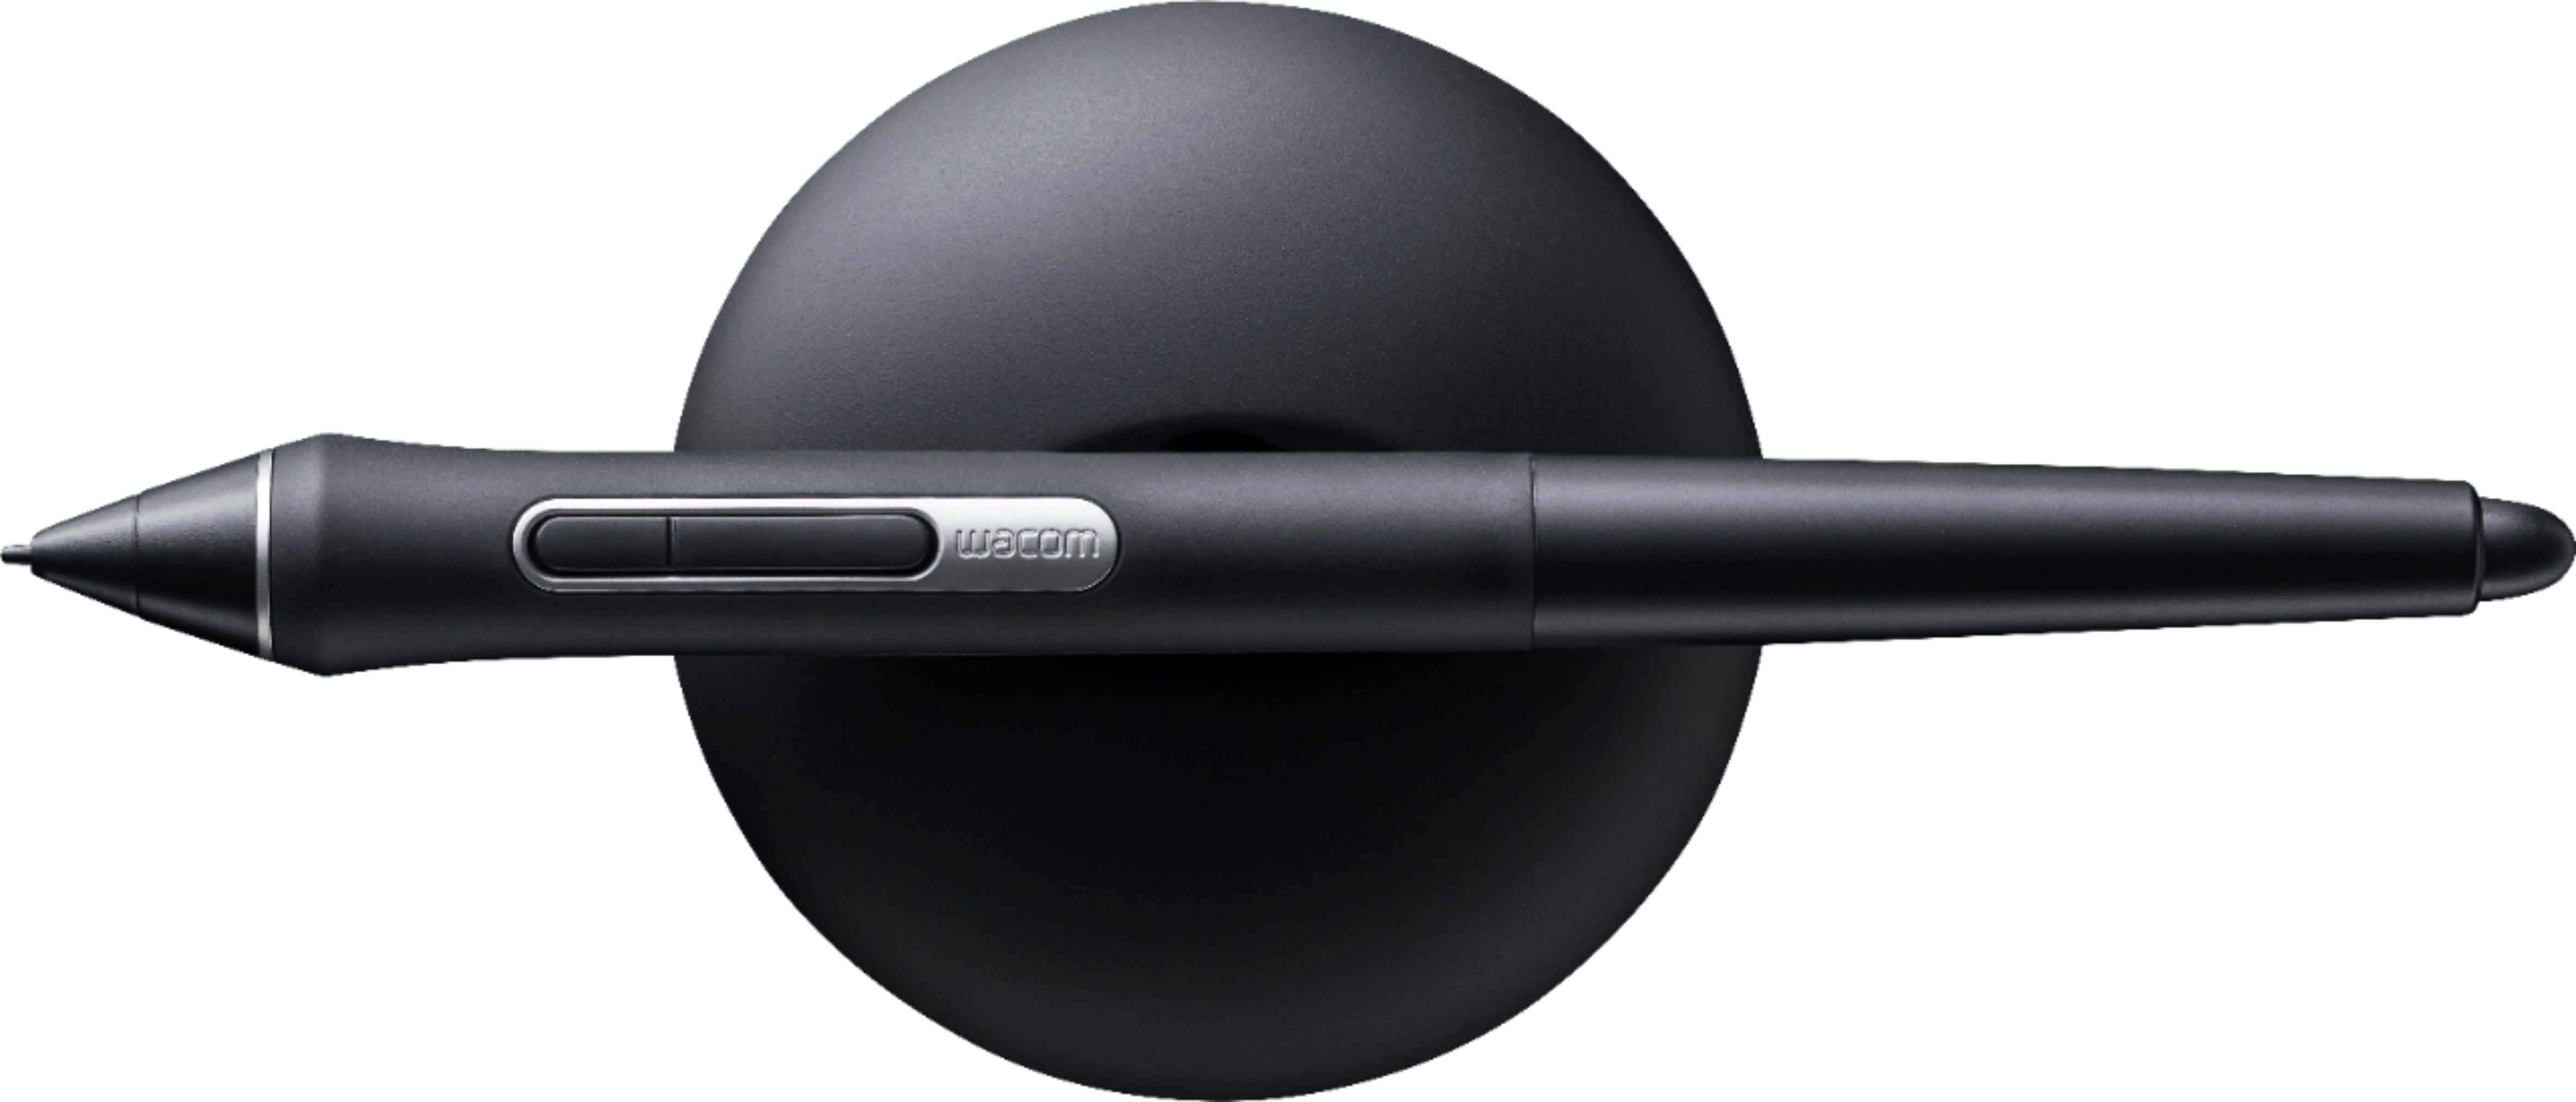 Wacom Intuos Pro Small Graphics Tablet Black PTH460K0A - Best Buy | Touchpens